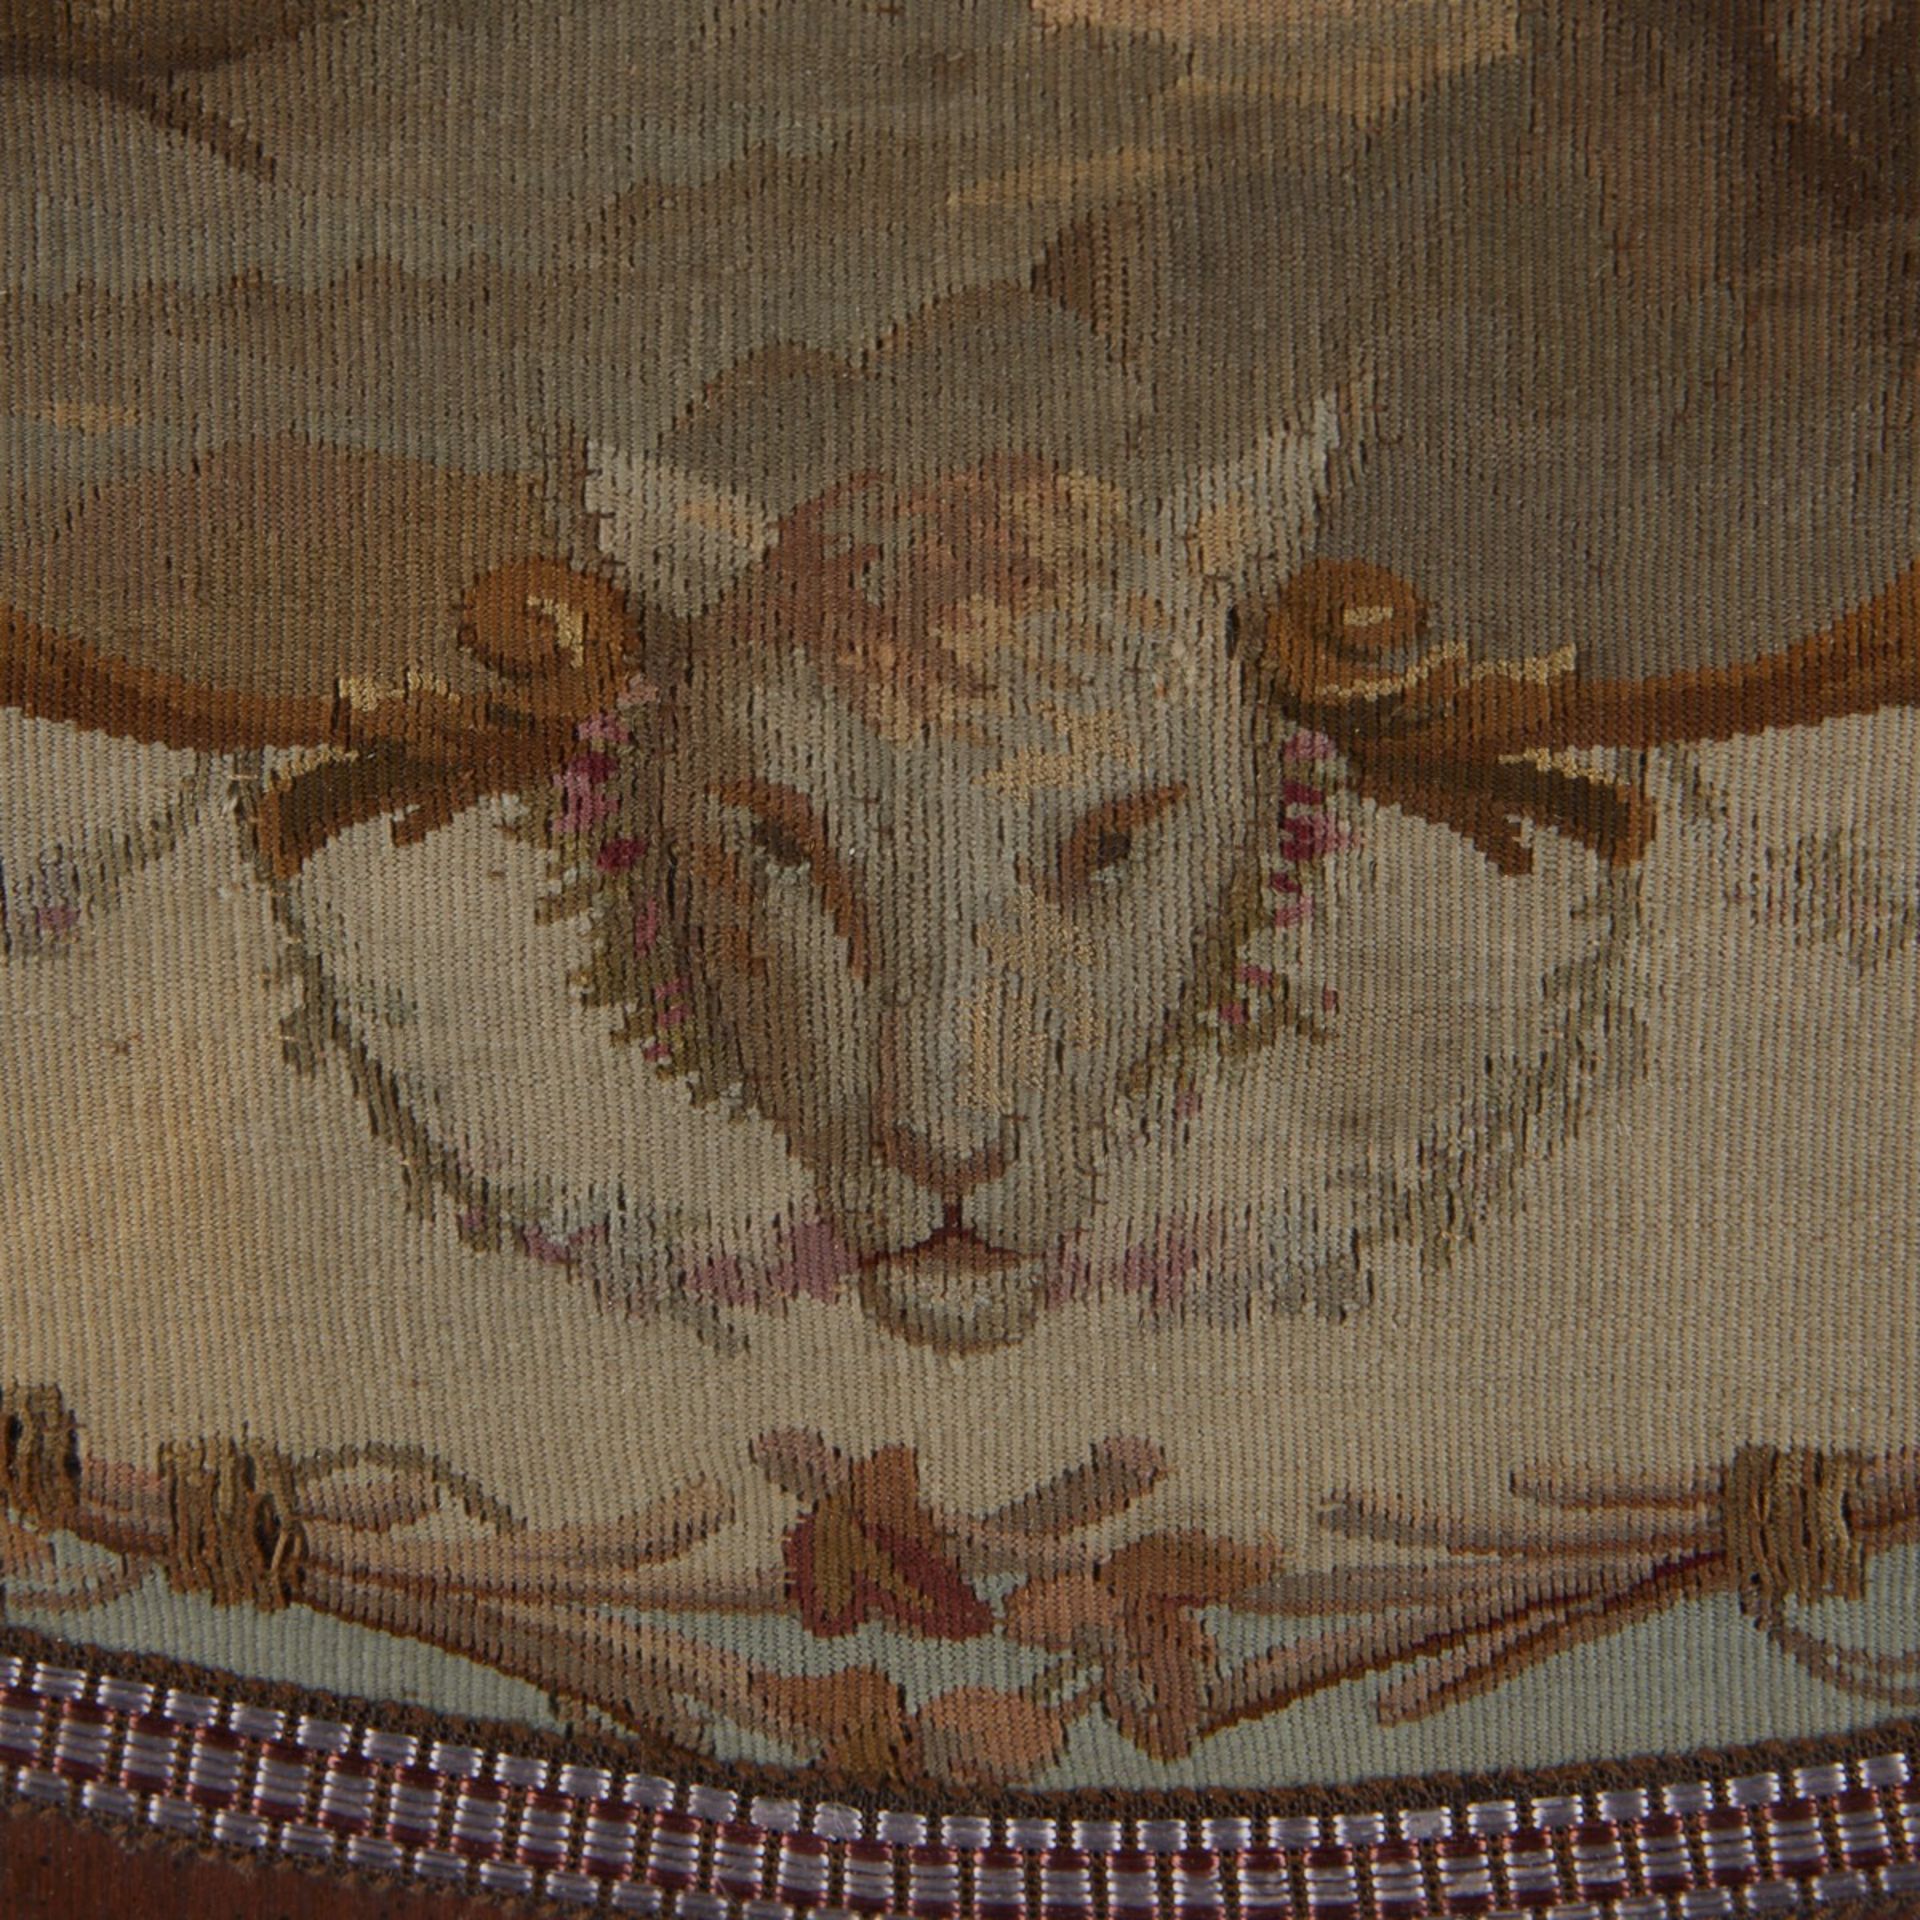 Pr 18th c. Aubusson French Tapestry Fragments - Image 5 of 9